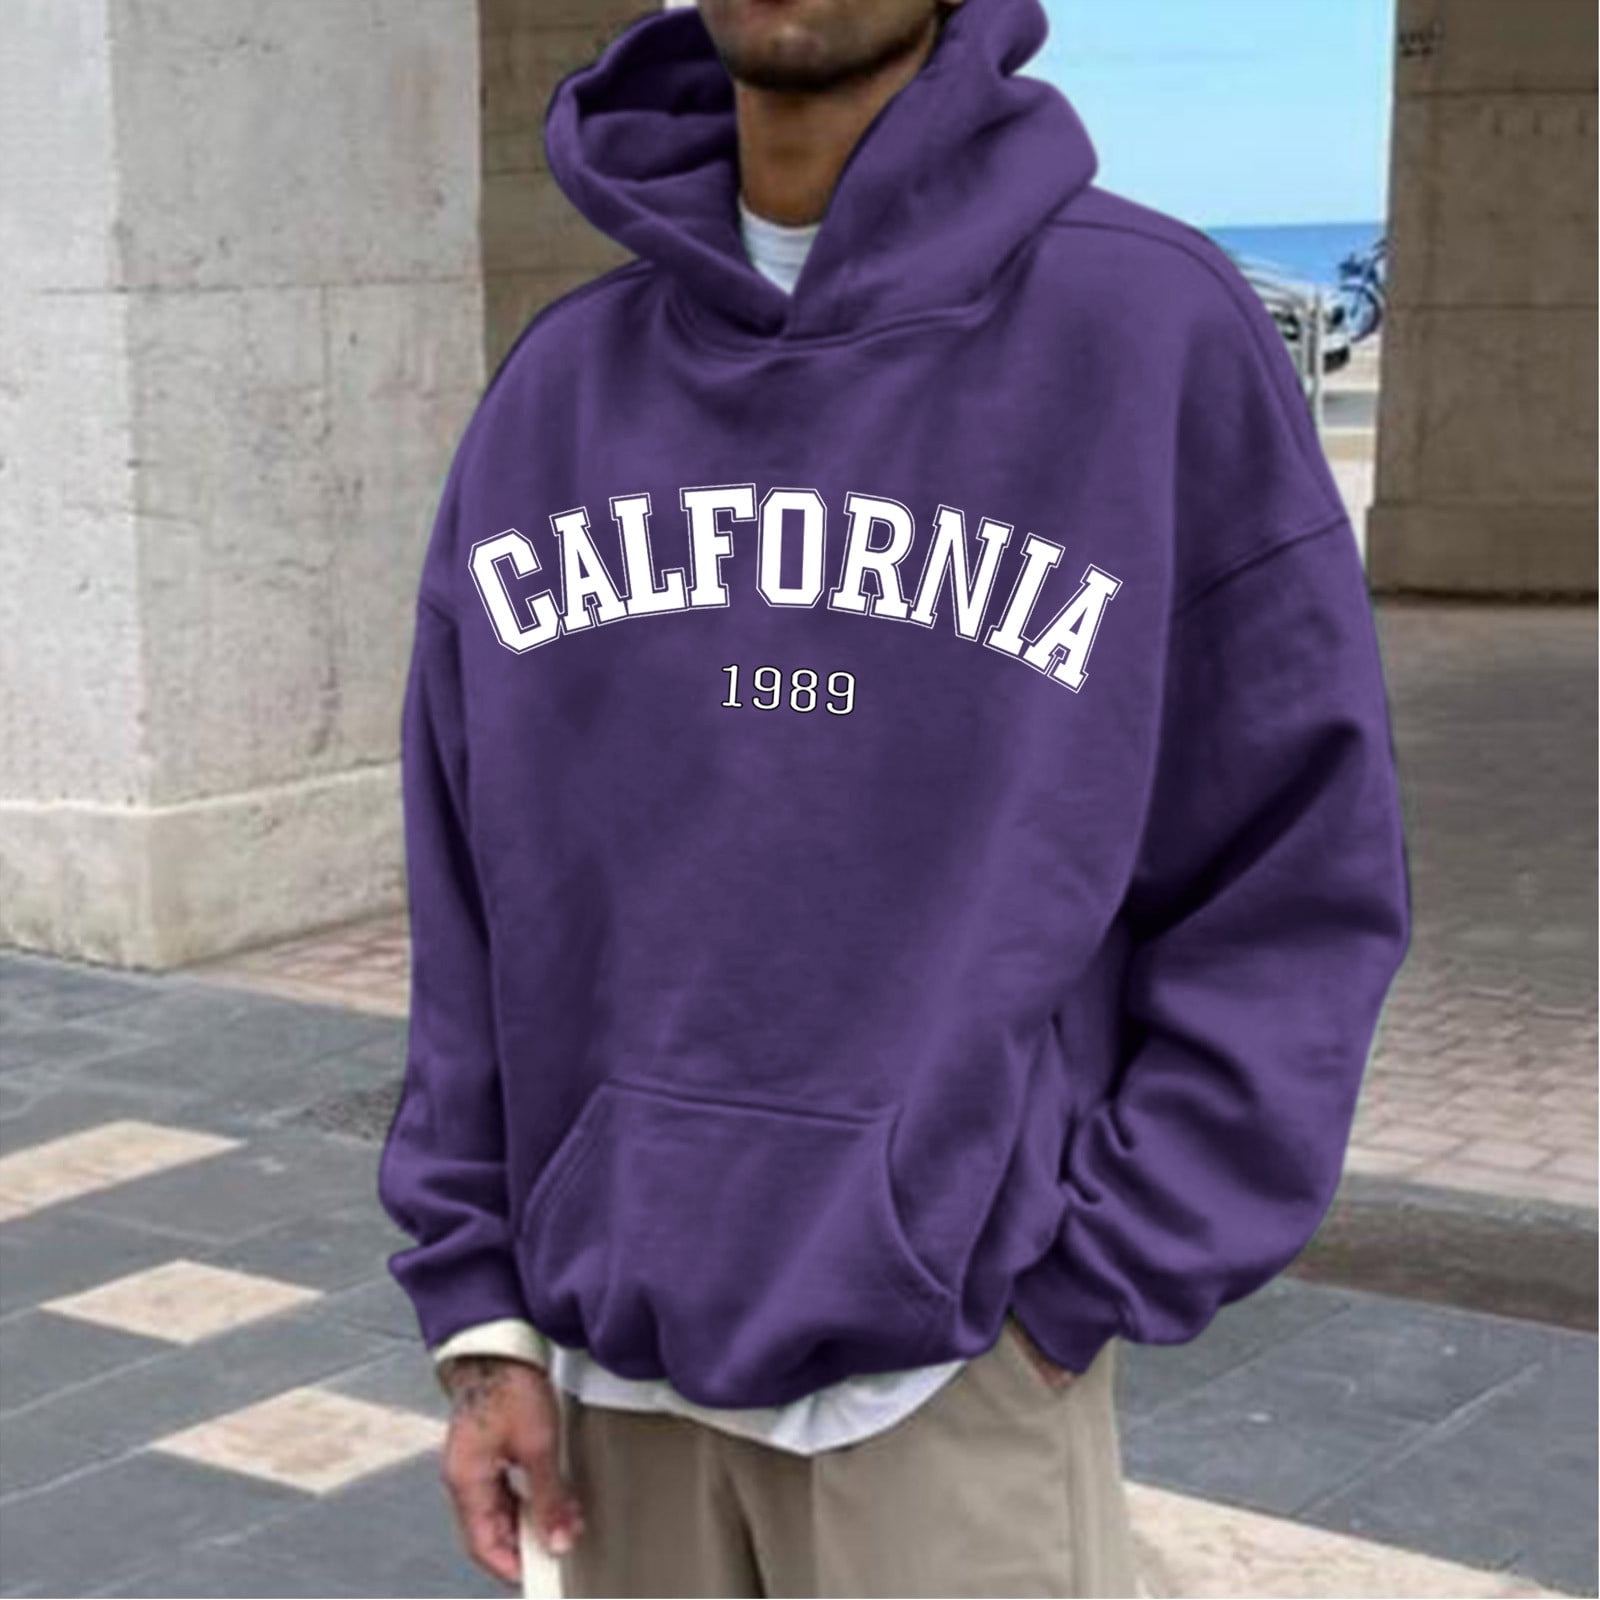 Hoodies For Mens Autumn And Winter Fashion Casual Loose Plus Size